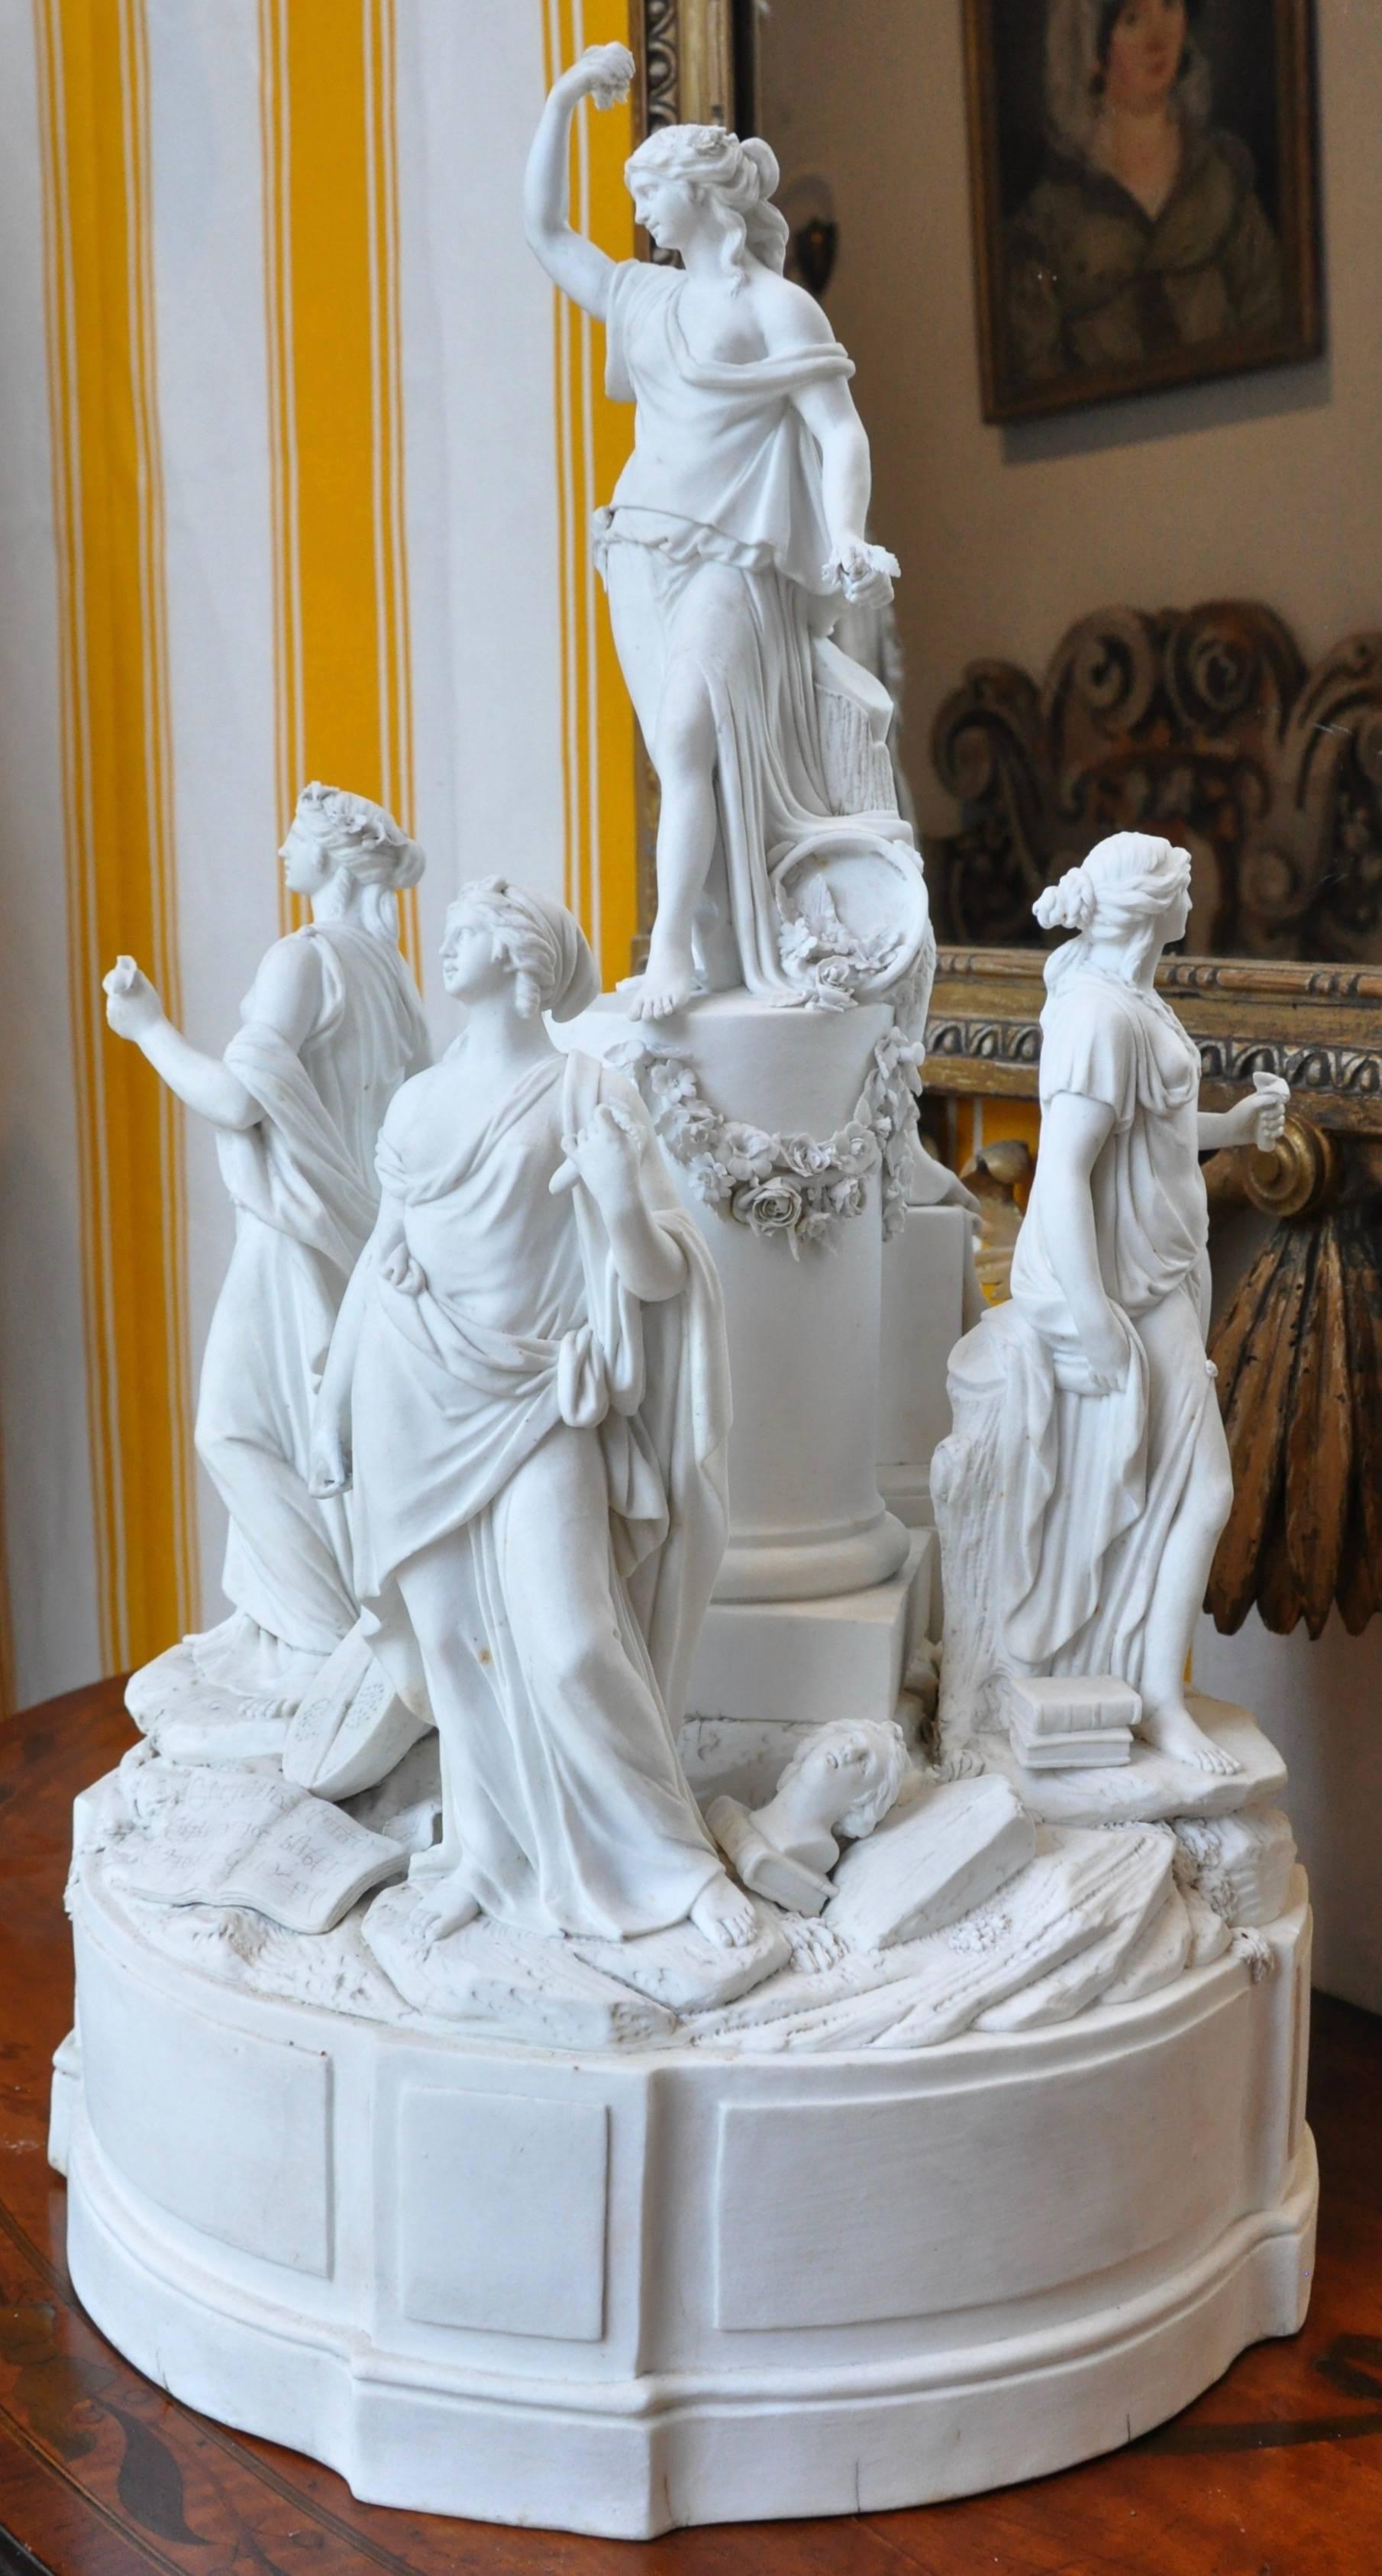 Late 18th century neoclassical figural grouping in bisque porcelain

--Depicting five of the muses
--Intricate details throughout as shown
--More than likely Sevres Post Revolution
--In great condition
--Monumental.